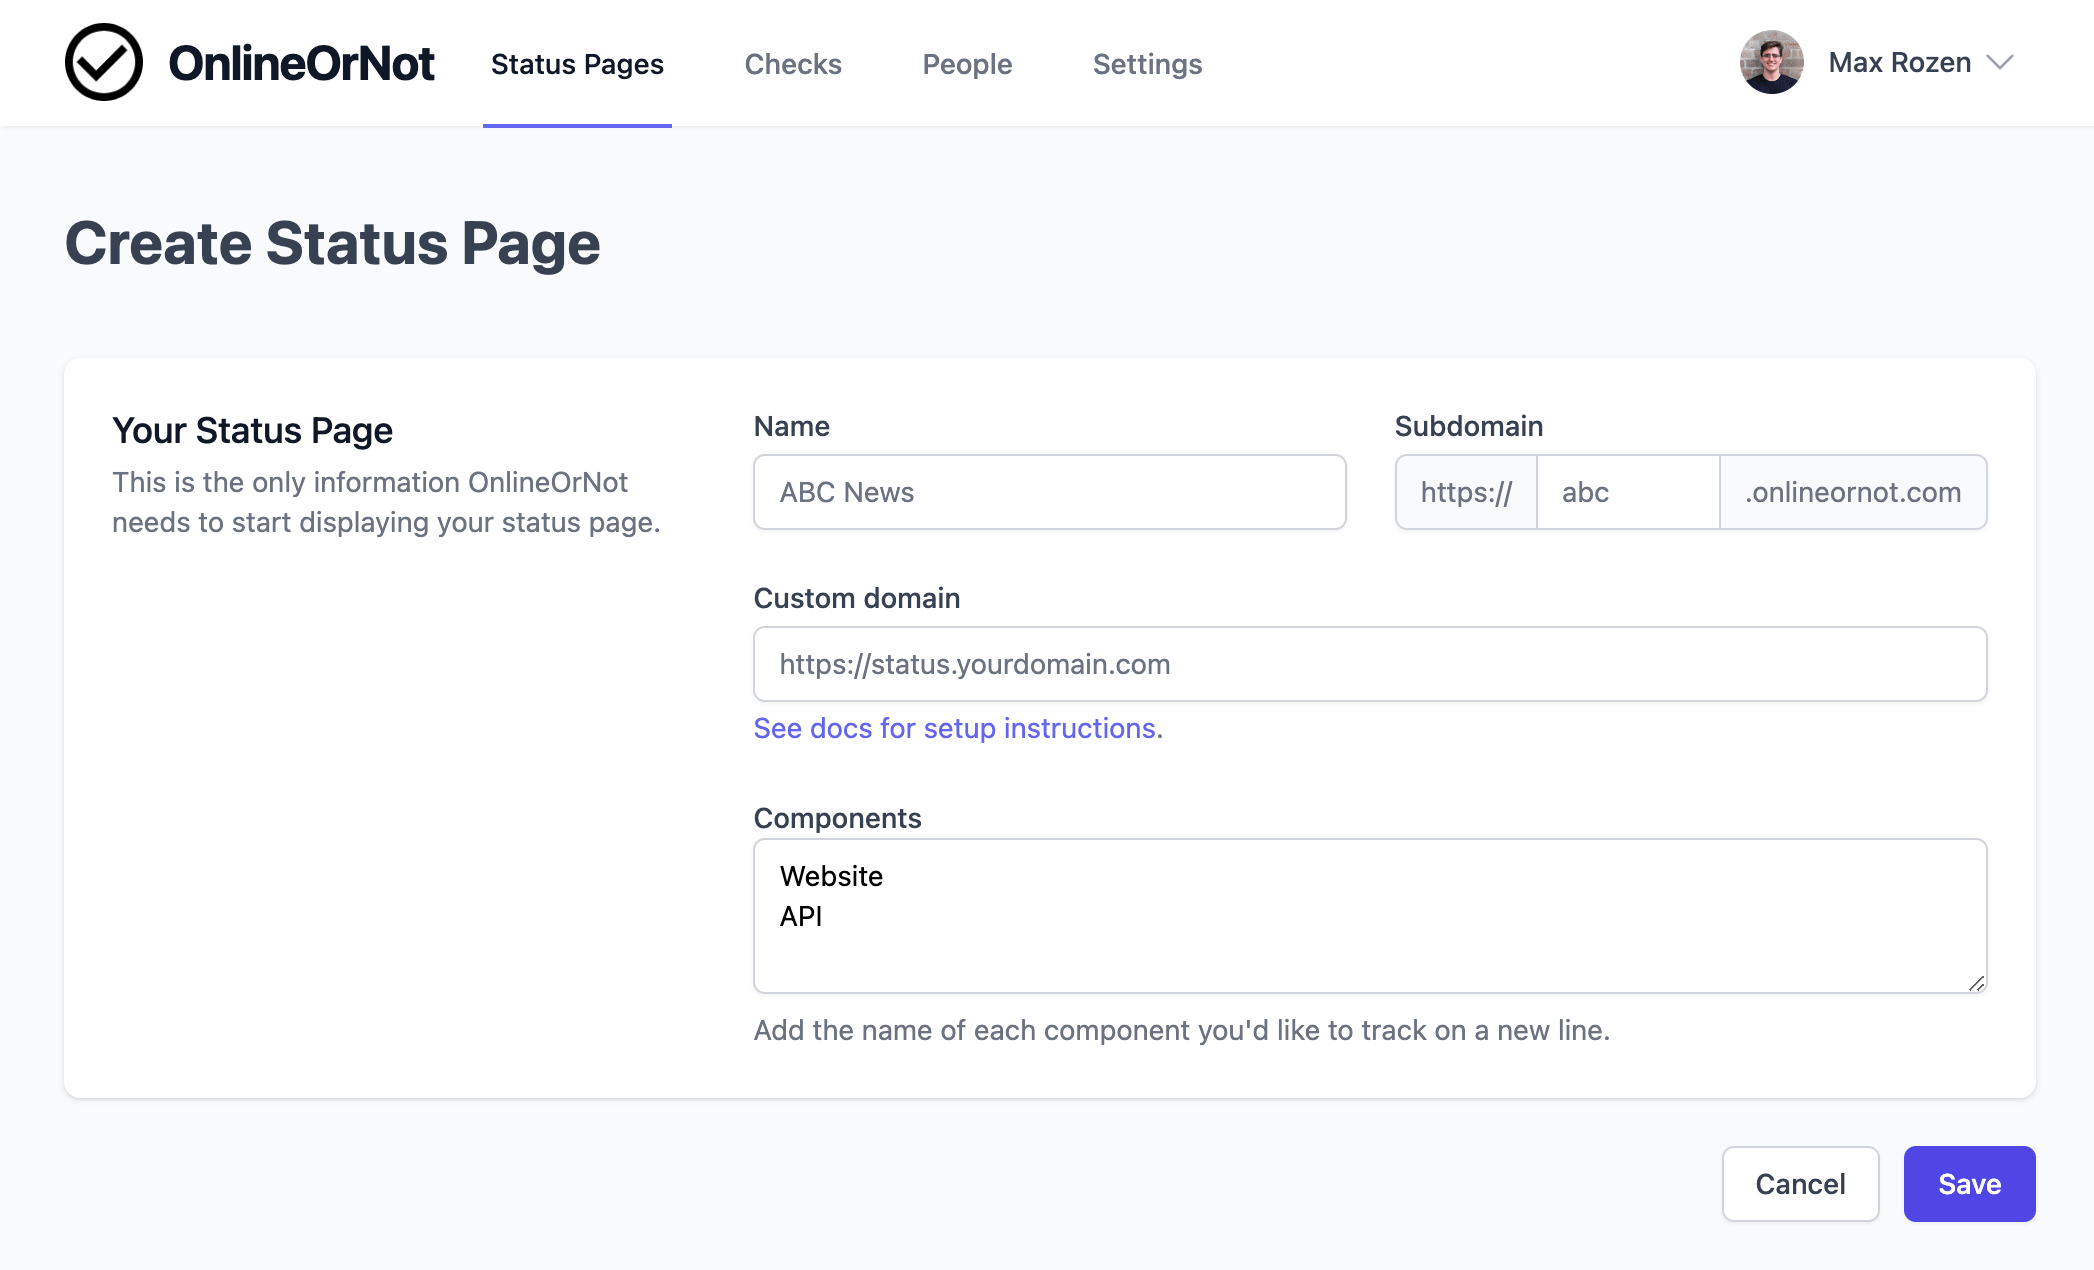 OnlineOrNot's Status Page Configuration Page